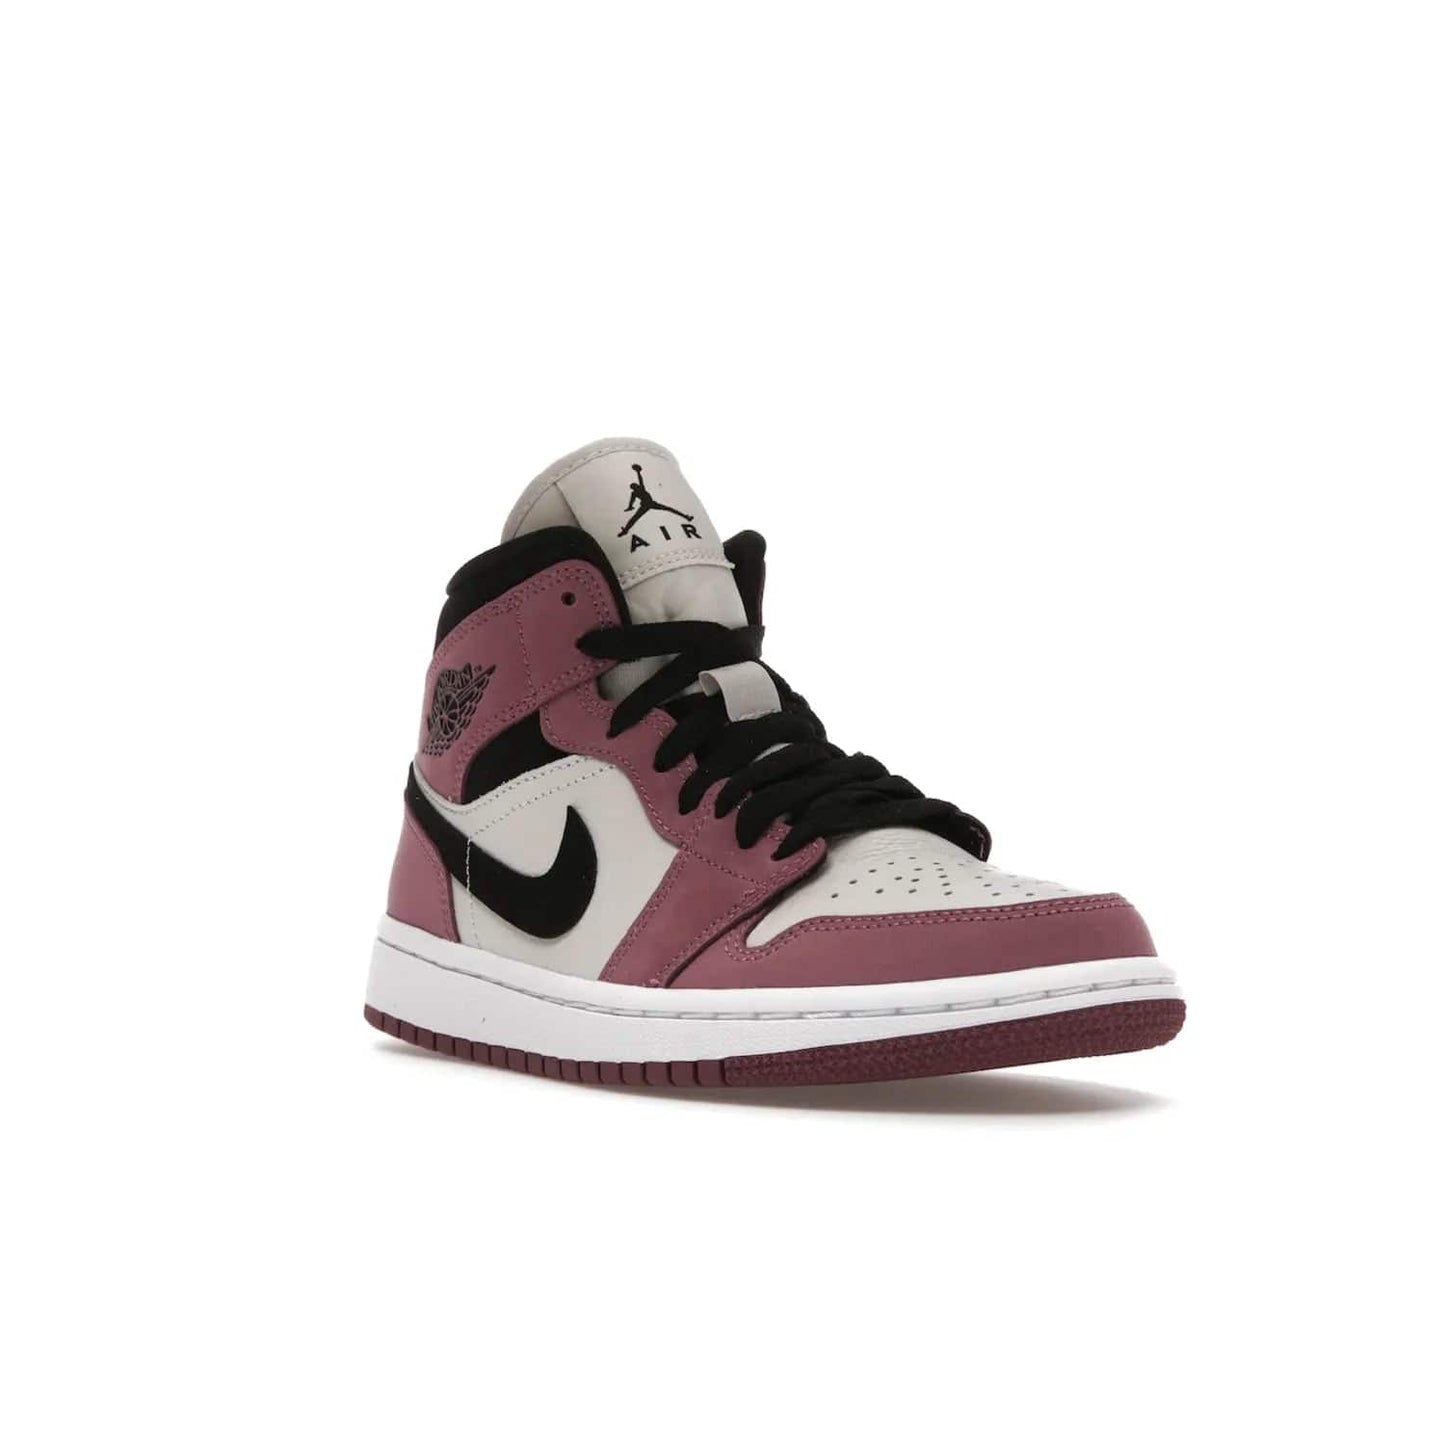 Jordan 1 Mid SE Light Mulberry (Women's) - Image 6 - Only at www.BallersClubKickz.com - Classic style meets performance with the Air Jordan 1 Mid Light Mulberry (Women's). Sleek leather overlays and light bone detailing bring out the best of this classic sneaker, perfect for the active woman on-the-go. Available March 2022.